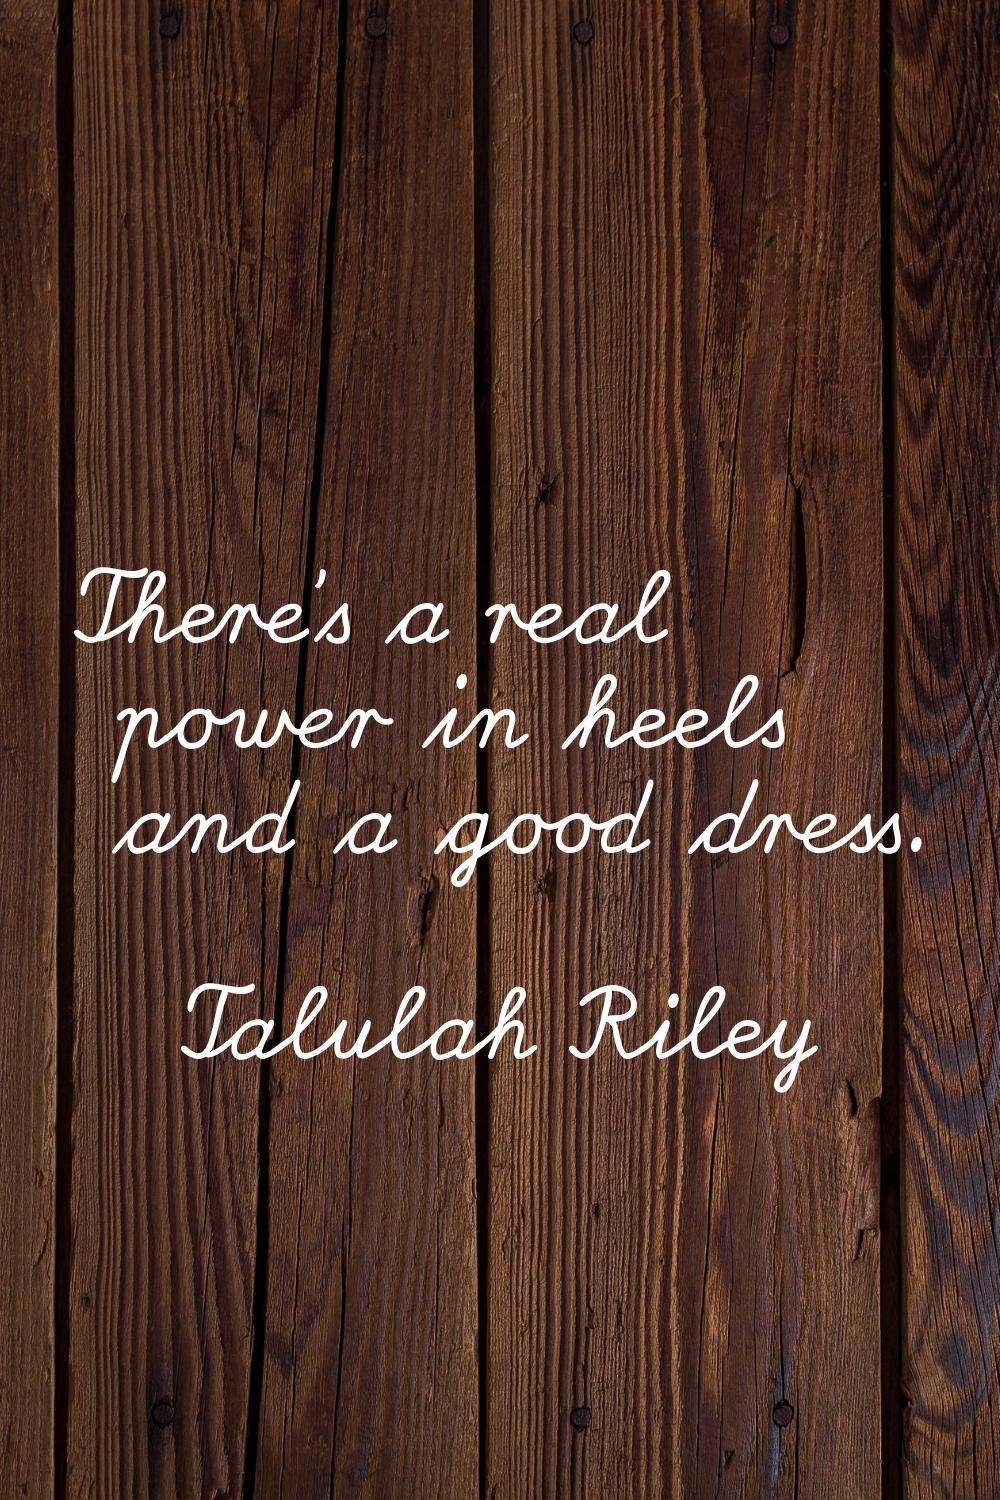 There's a real power in heels and a good dress.